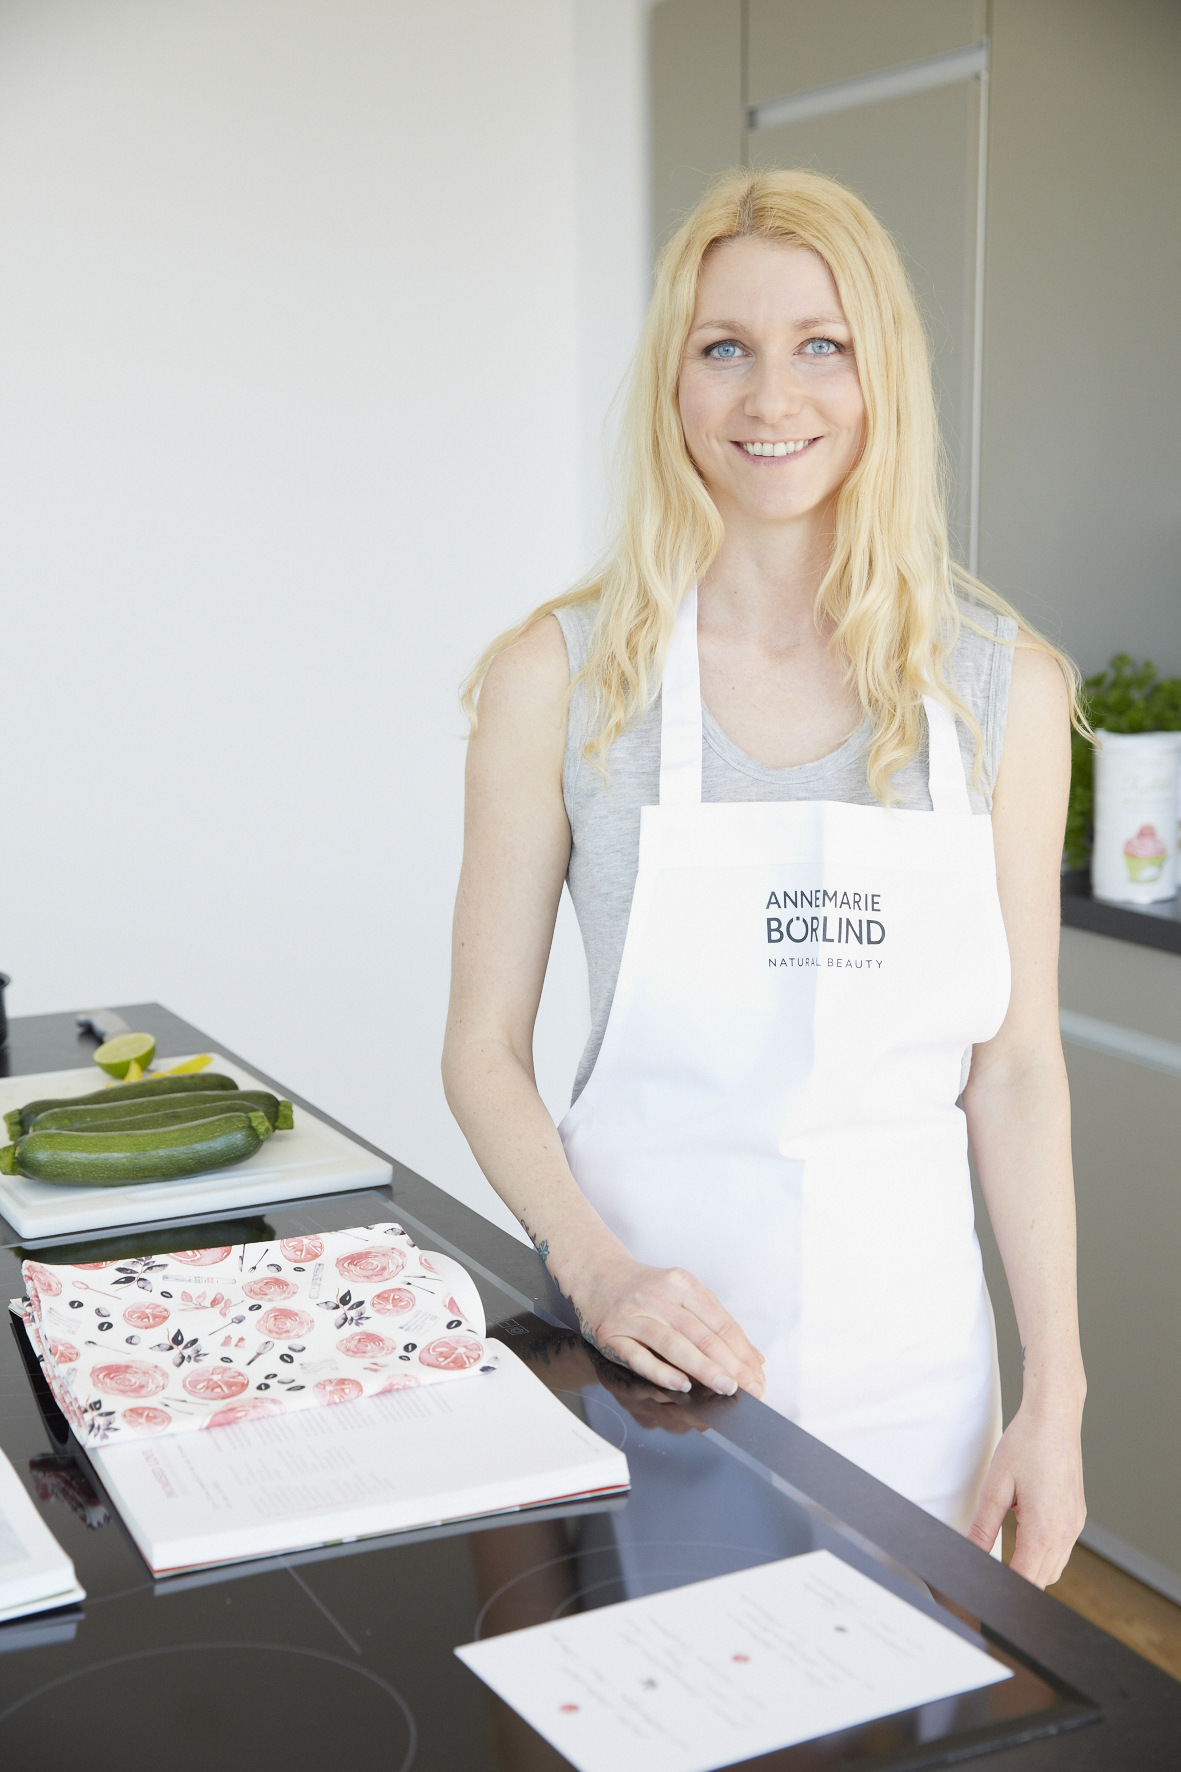 Out & About: Annemarie Börlind Energynature | The Daily Dose